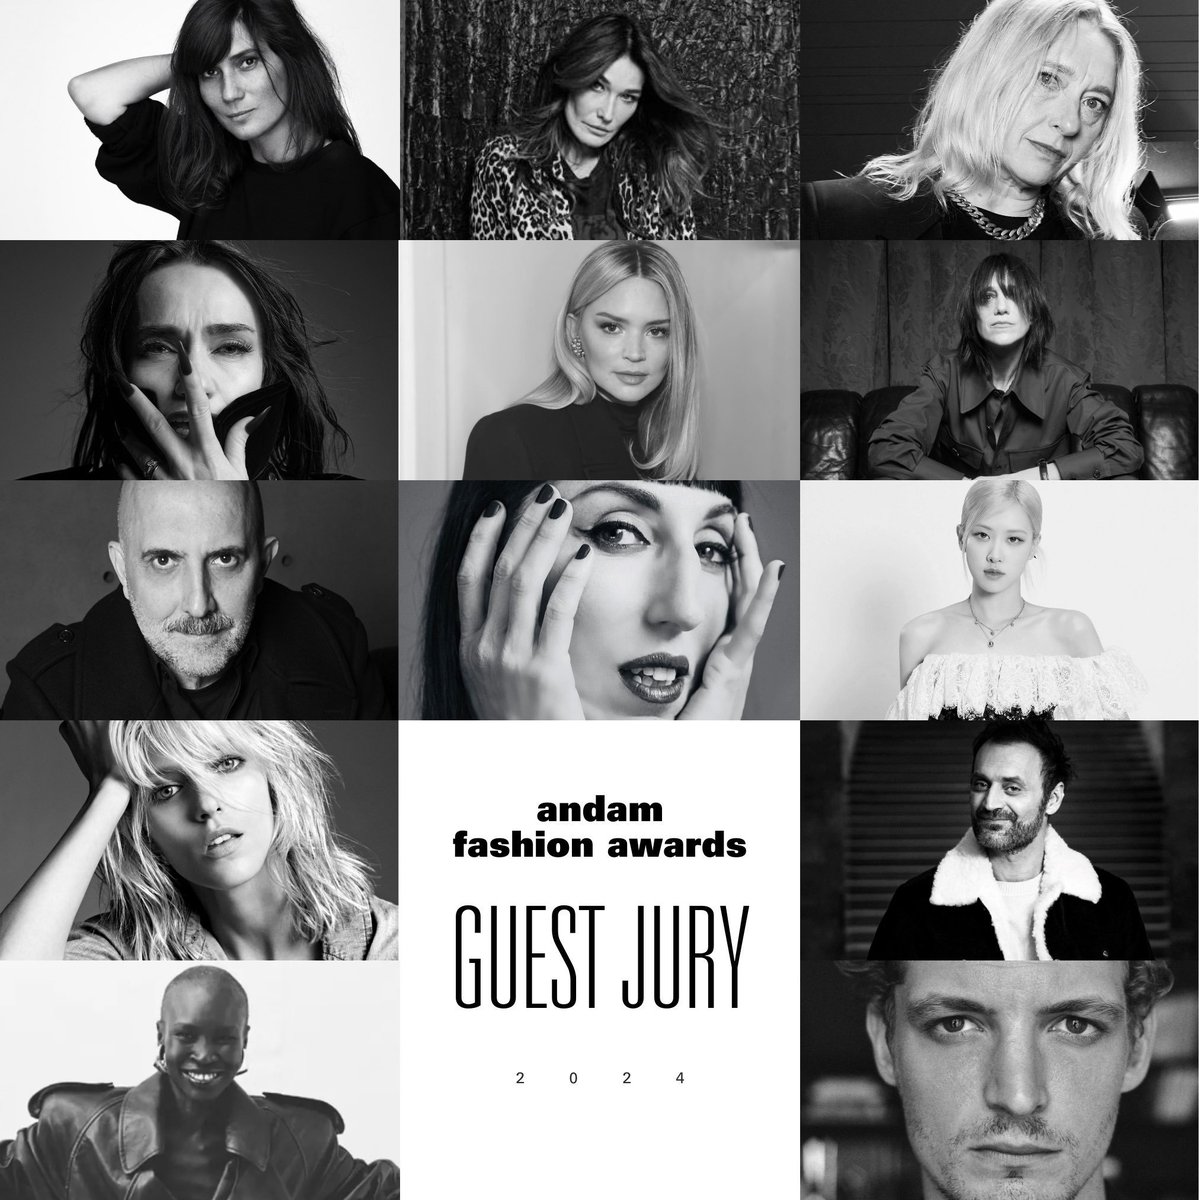 SAINT LAURENT's creative director has chosen ROSE to be part of the jury for the ANDAM prize

#ROSE #BLACKPINK #YSL #SaintLaurent #KPOP